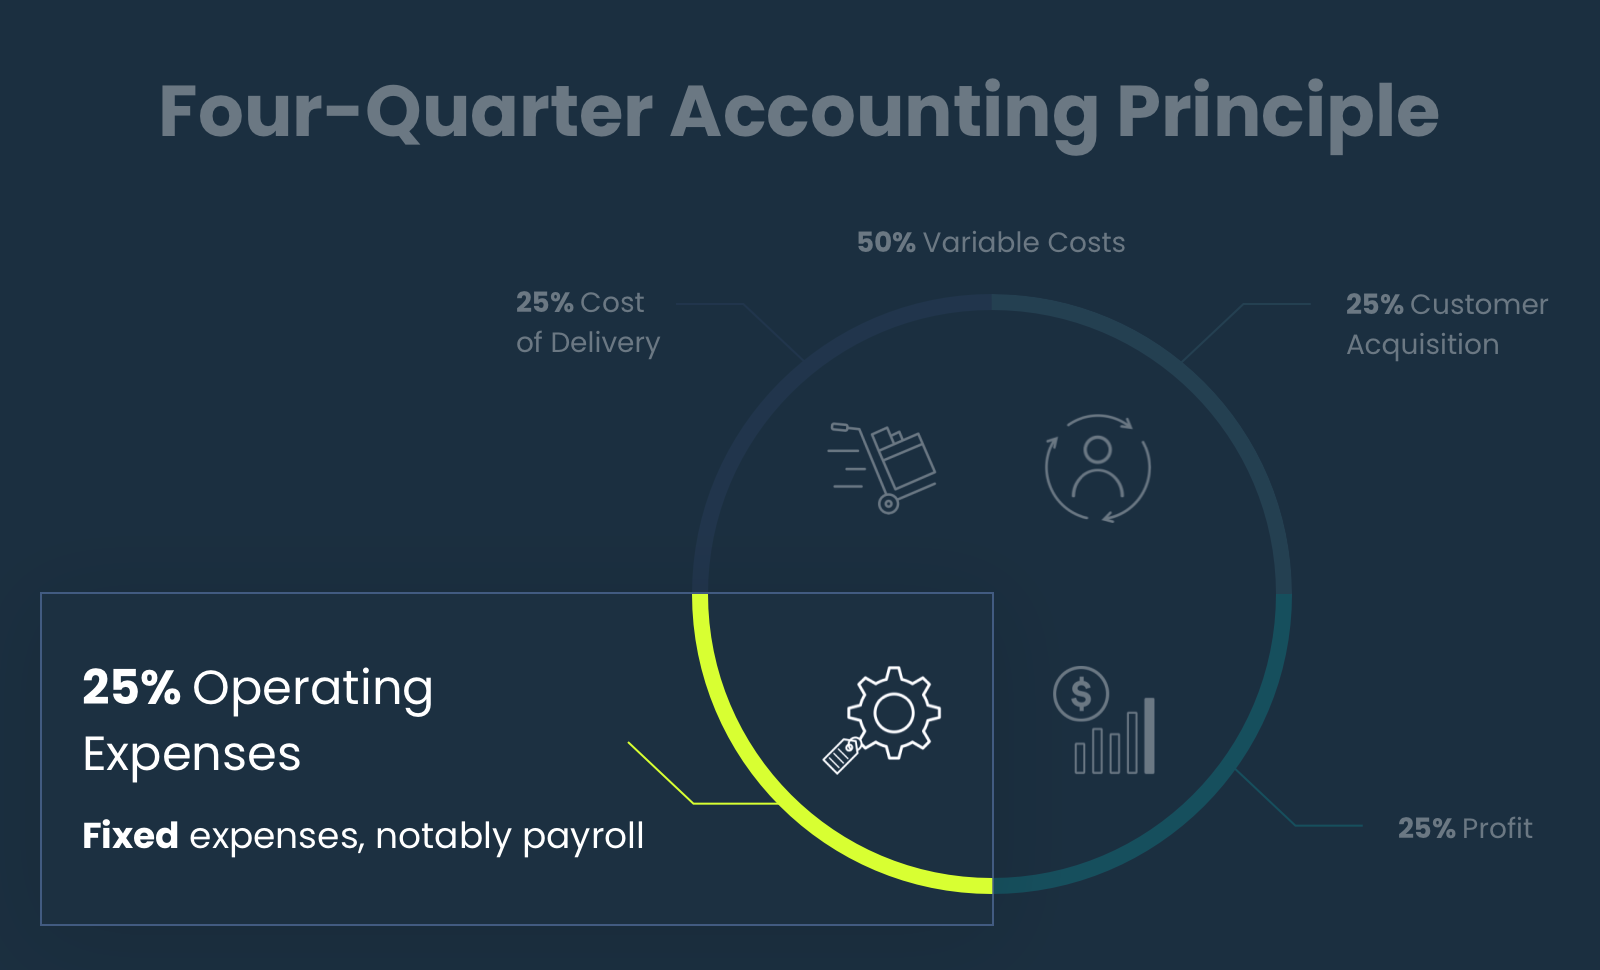 Ecommerce Business Four-Quarter Accounting Principle: Operating Expenses